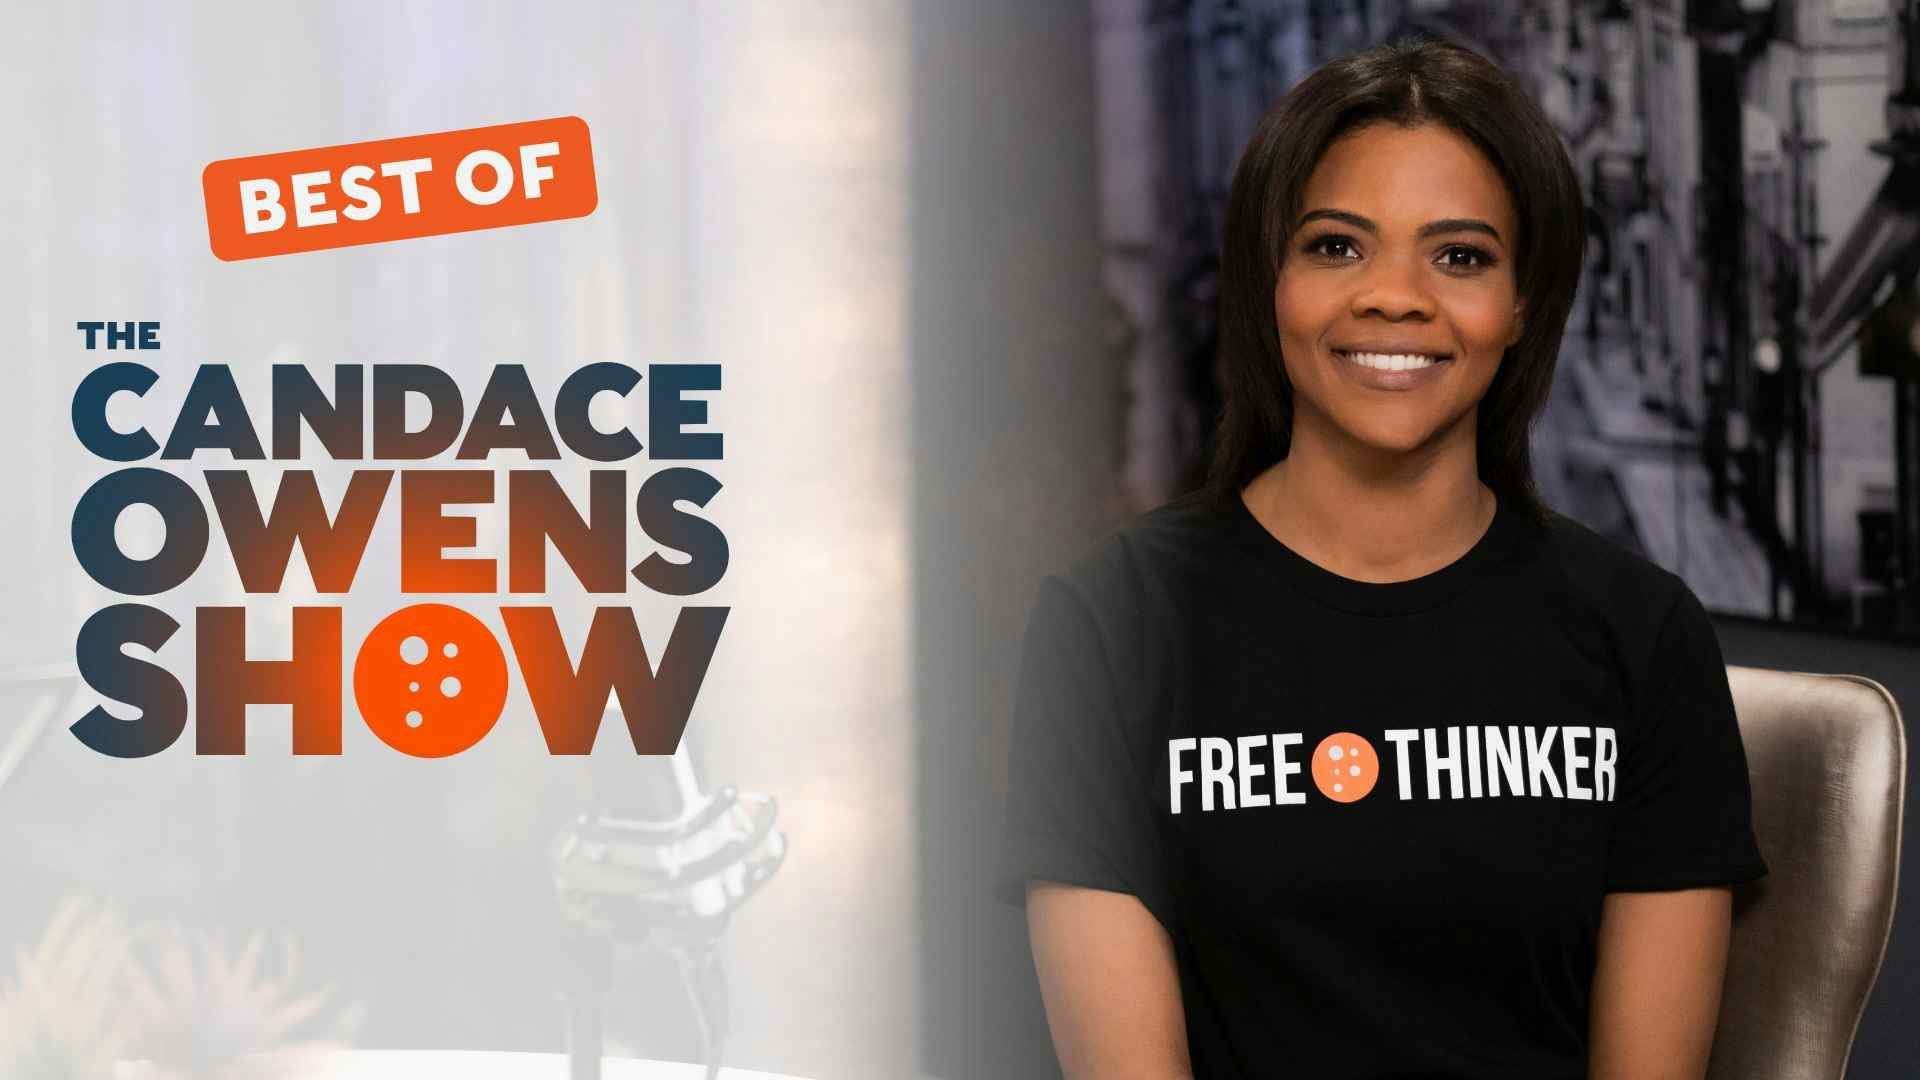 Best of The Candace Owens Show